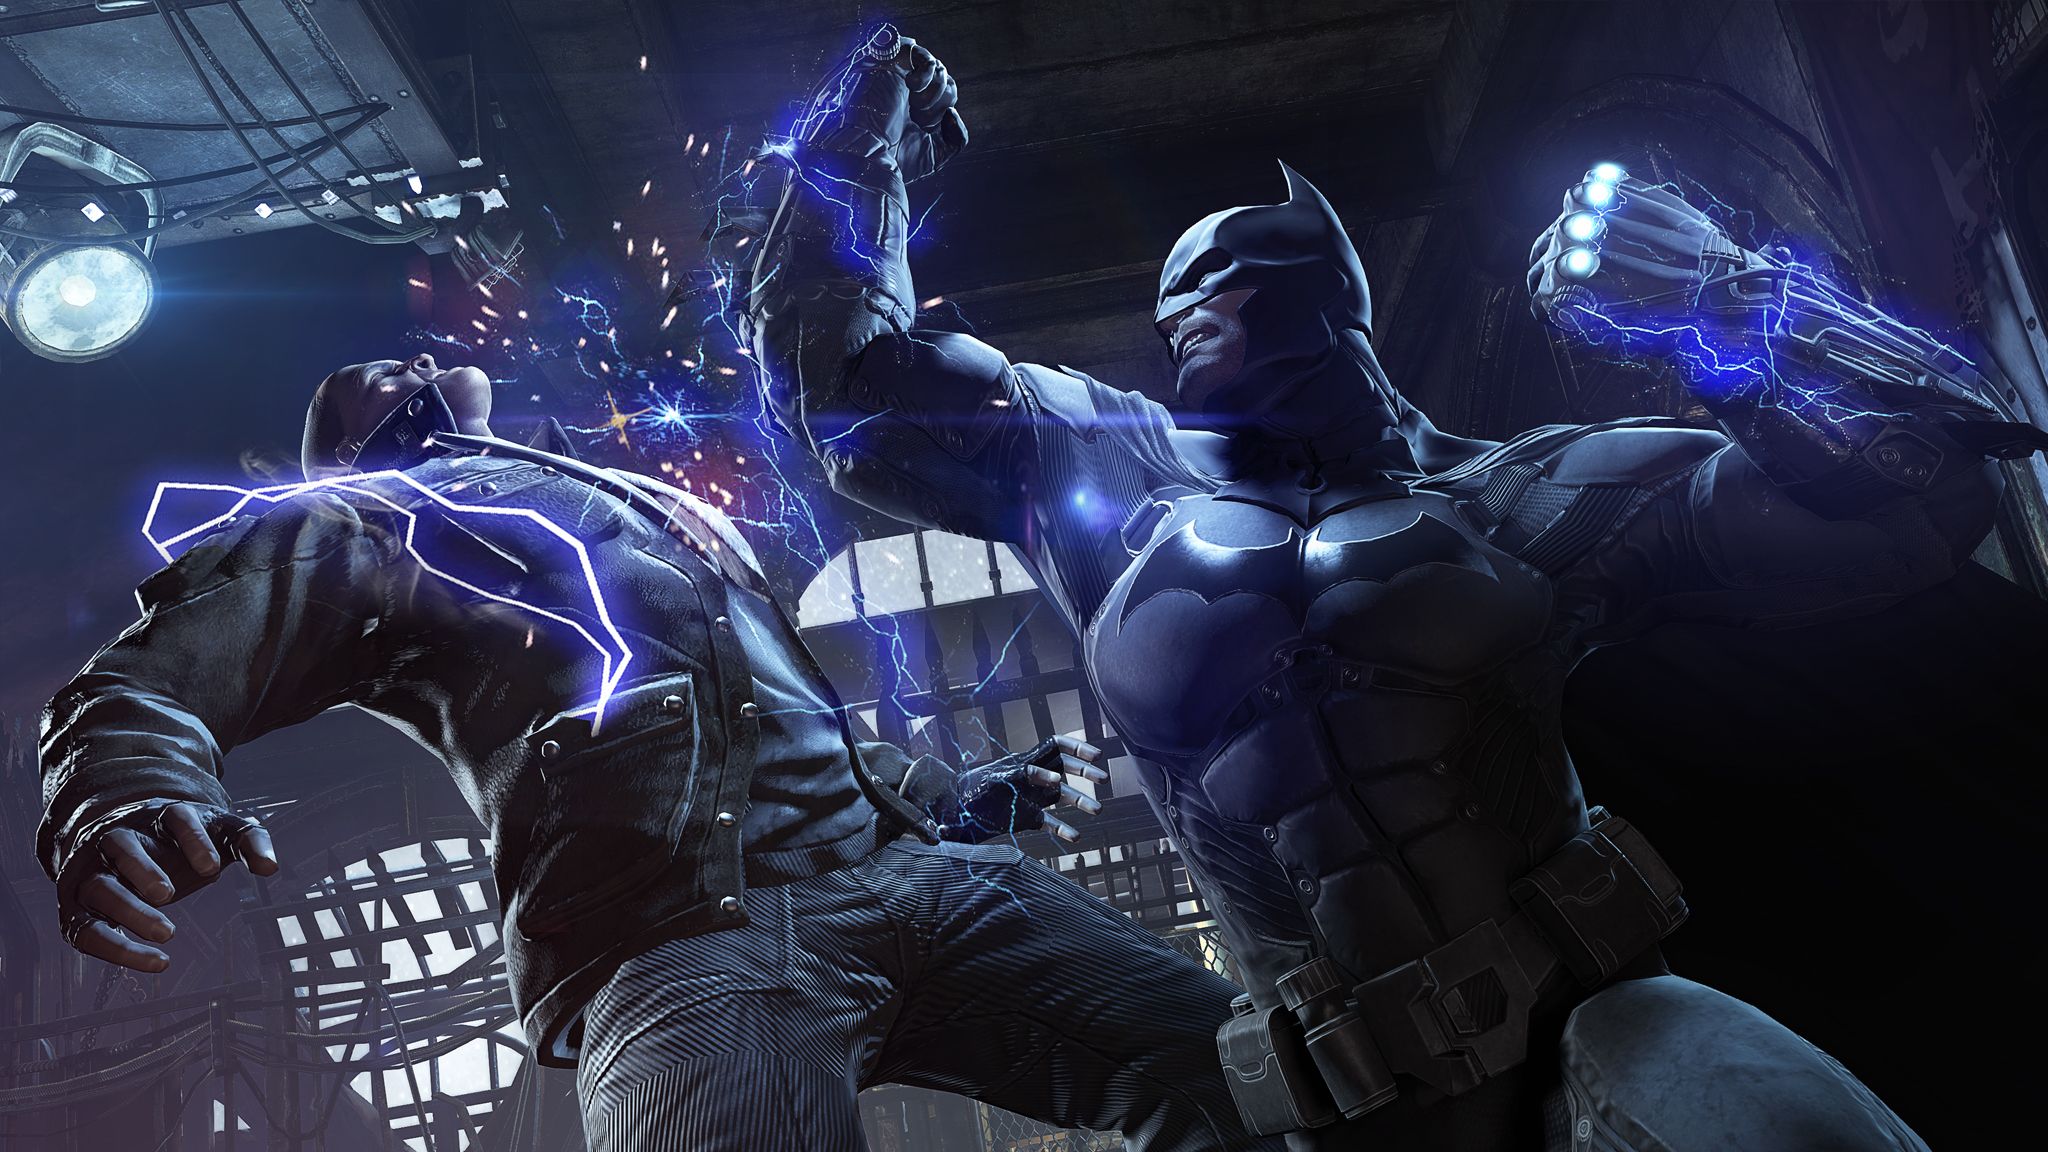 Batman: Arkham Origins Will Be Getting New Patches to Fix Gameplay Issues